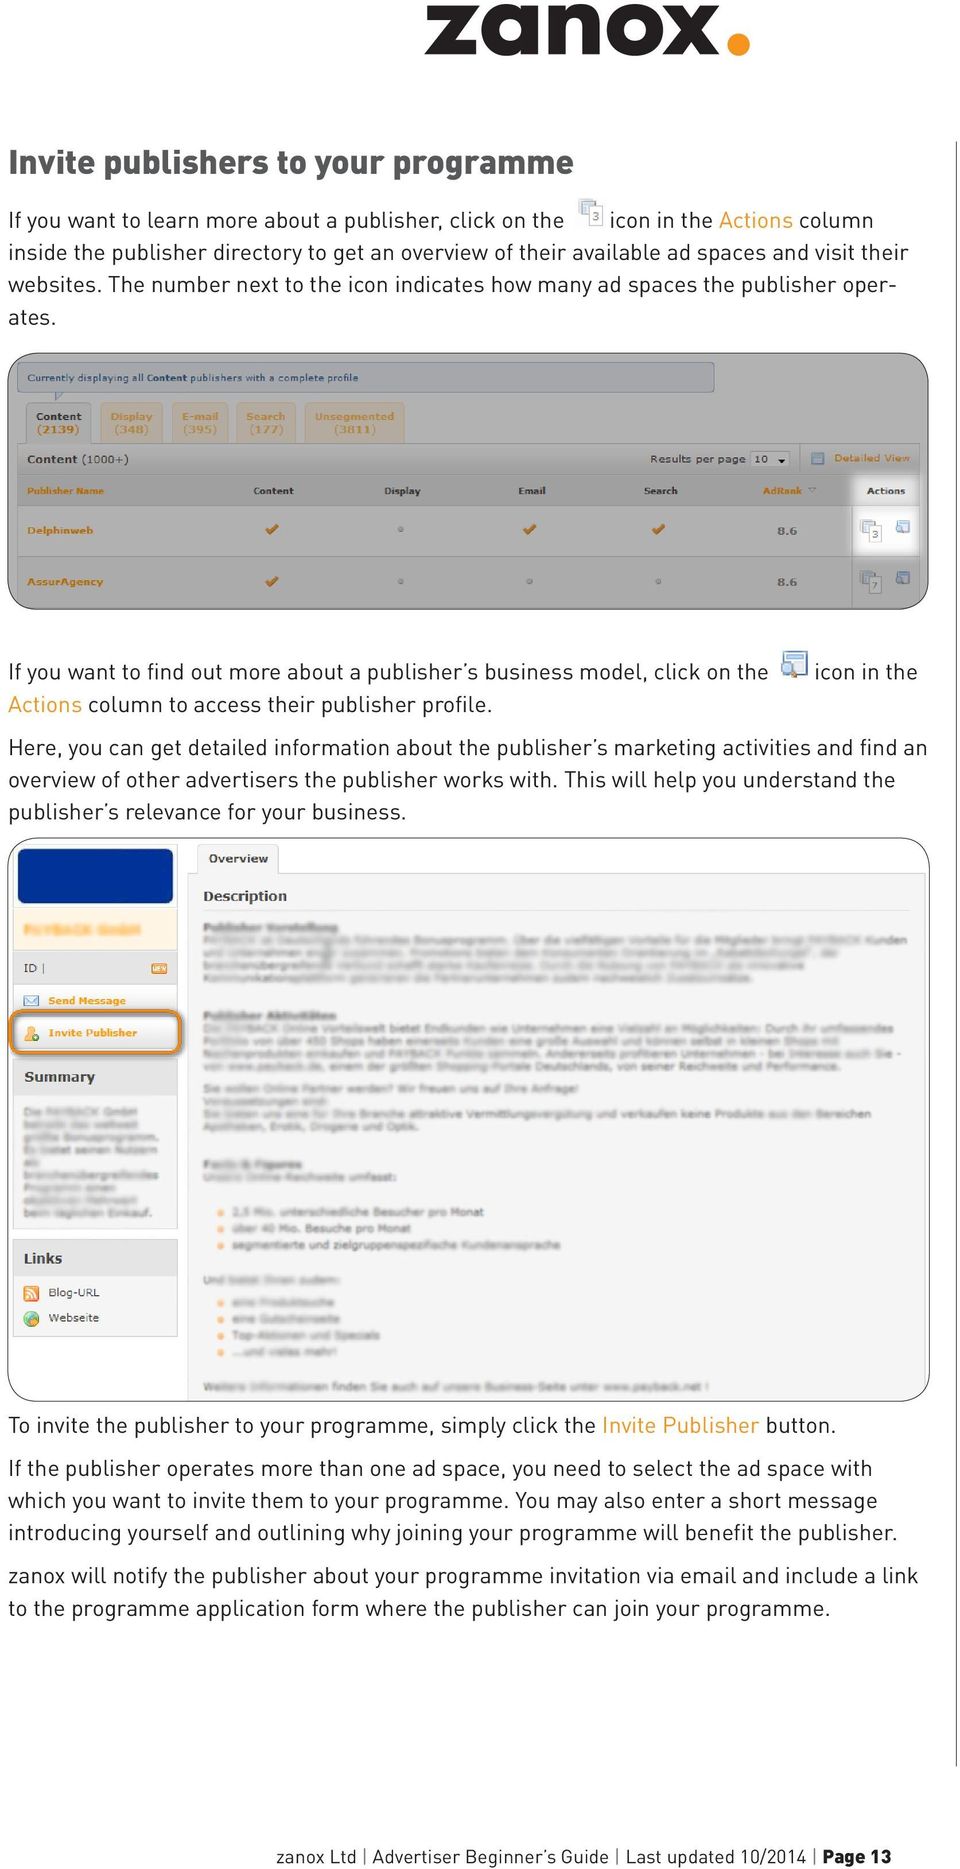 If you want to find out more about a publisher s business model, click on the Actions column to access their publisher profile.